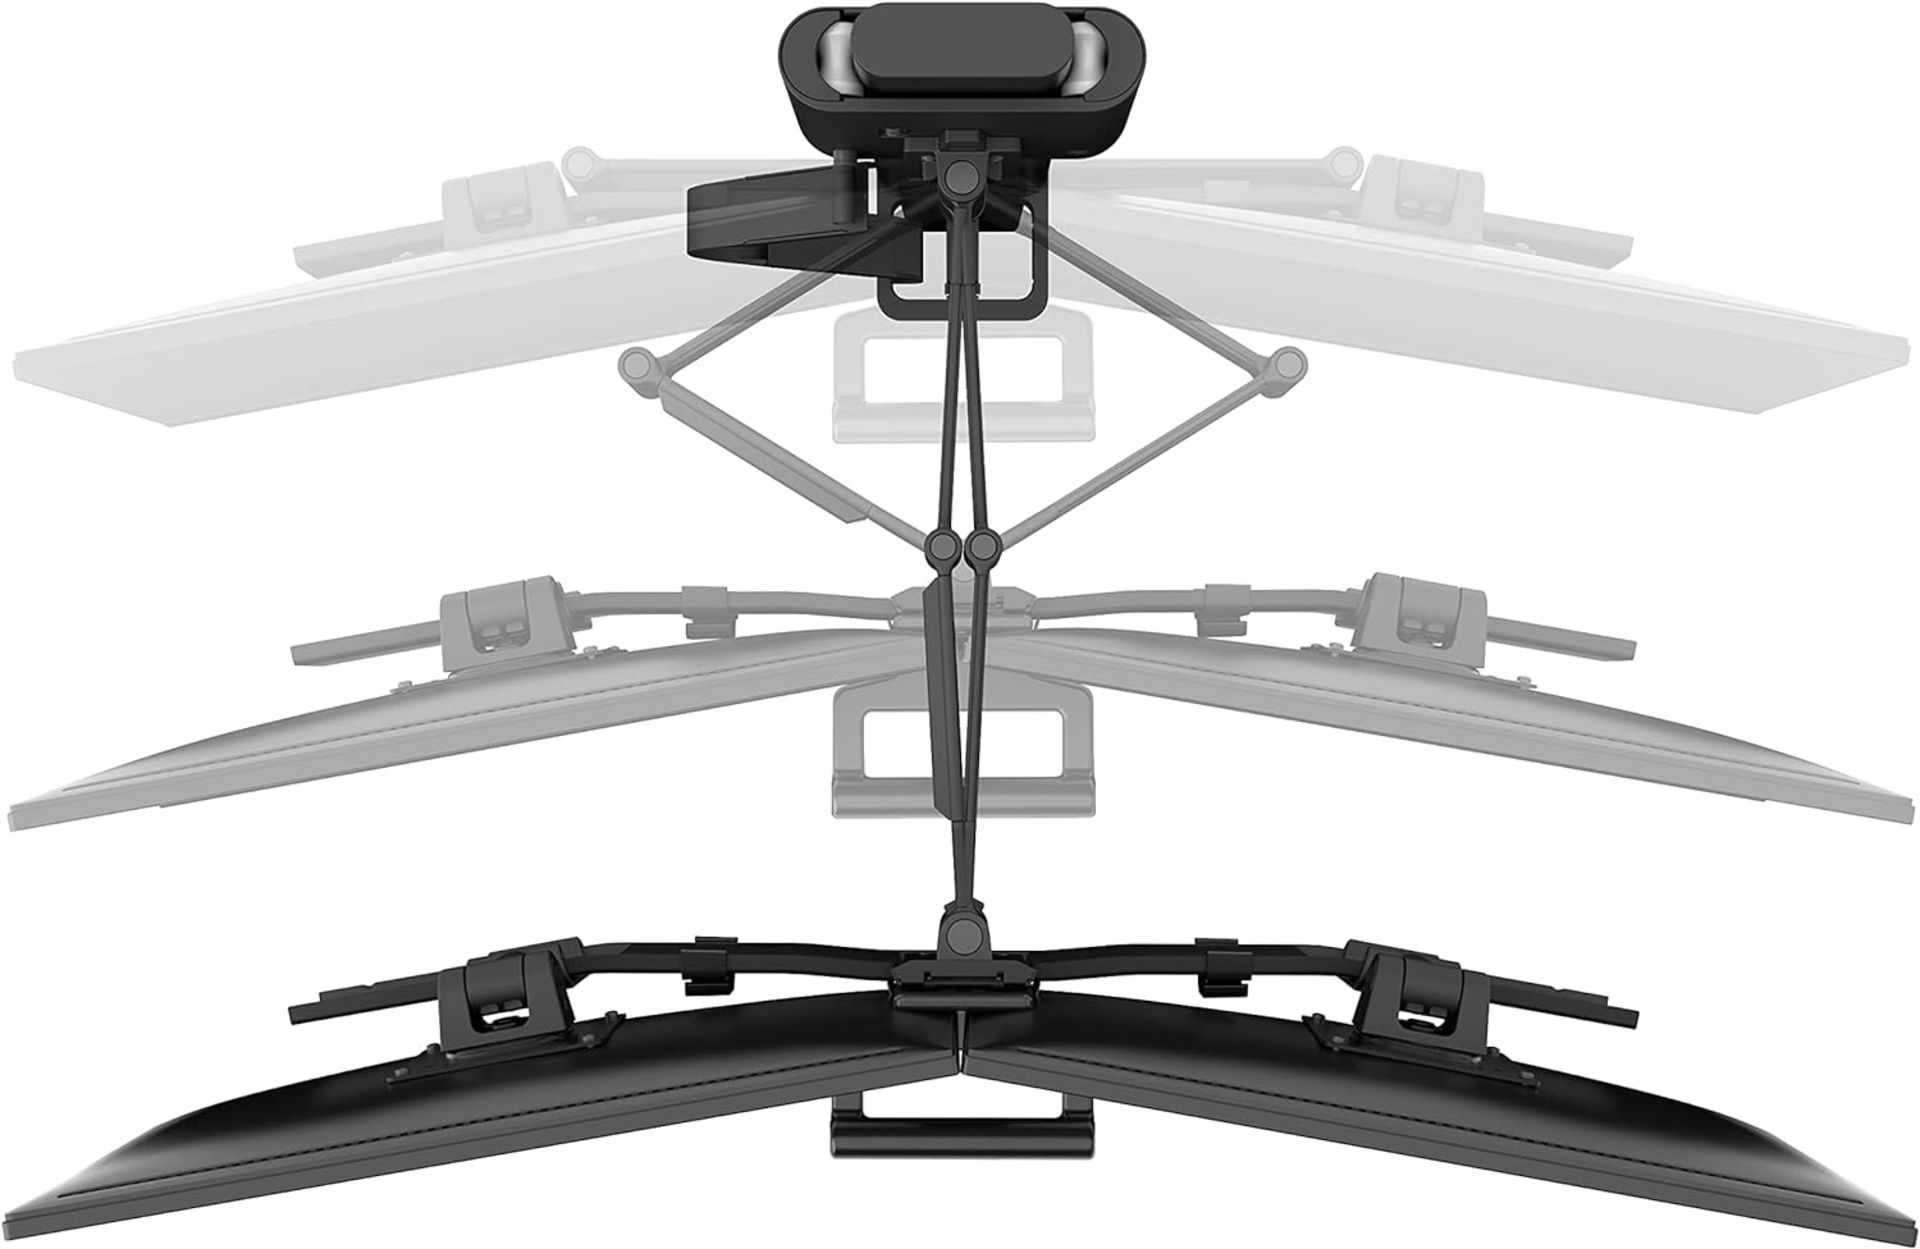 NEW & BOXED ERGOTRON Trace Dual Monitor Arm, VESA Desk Mount. RRP £417. for 2 Monitors Up to 27 - Image 6 of 8